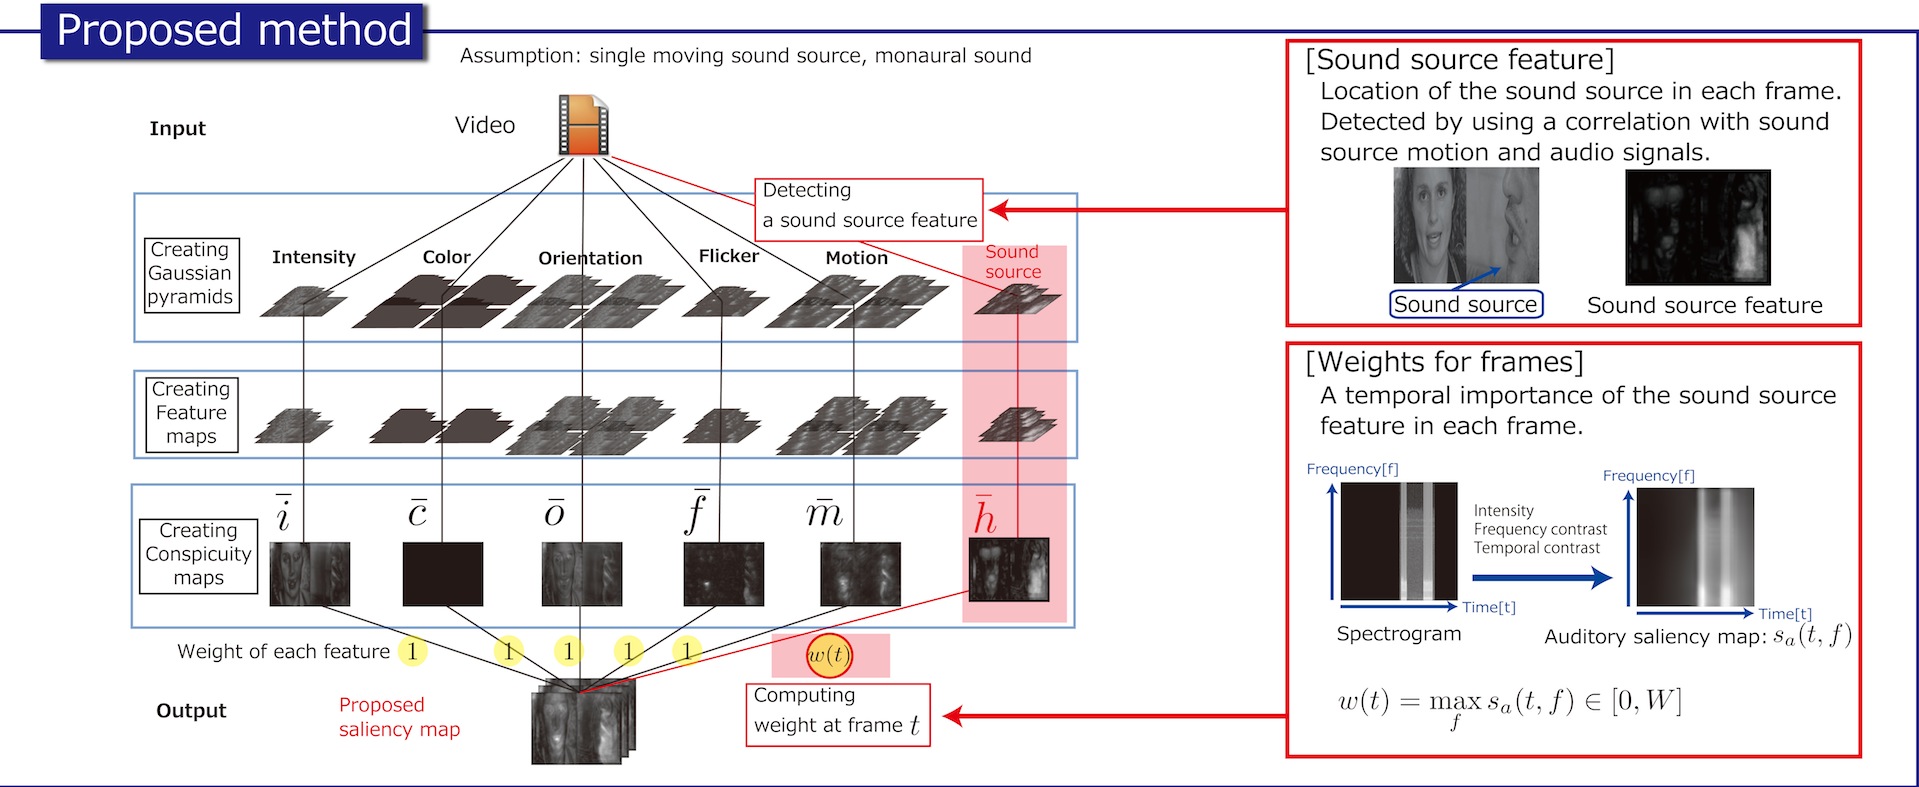 Incorporating Audio Signals into Constructing a Visual Saliency Map